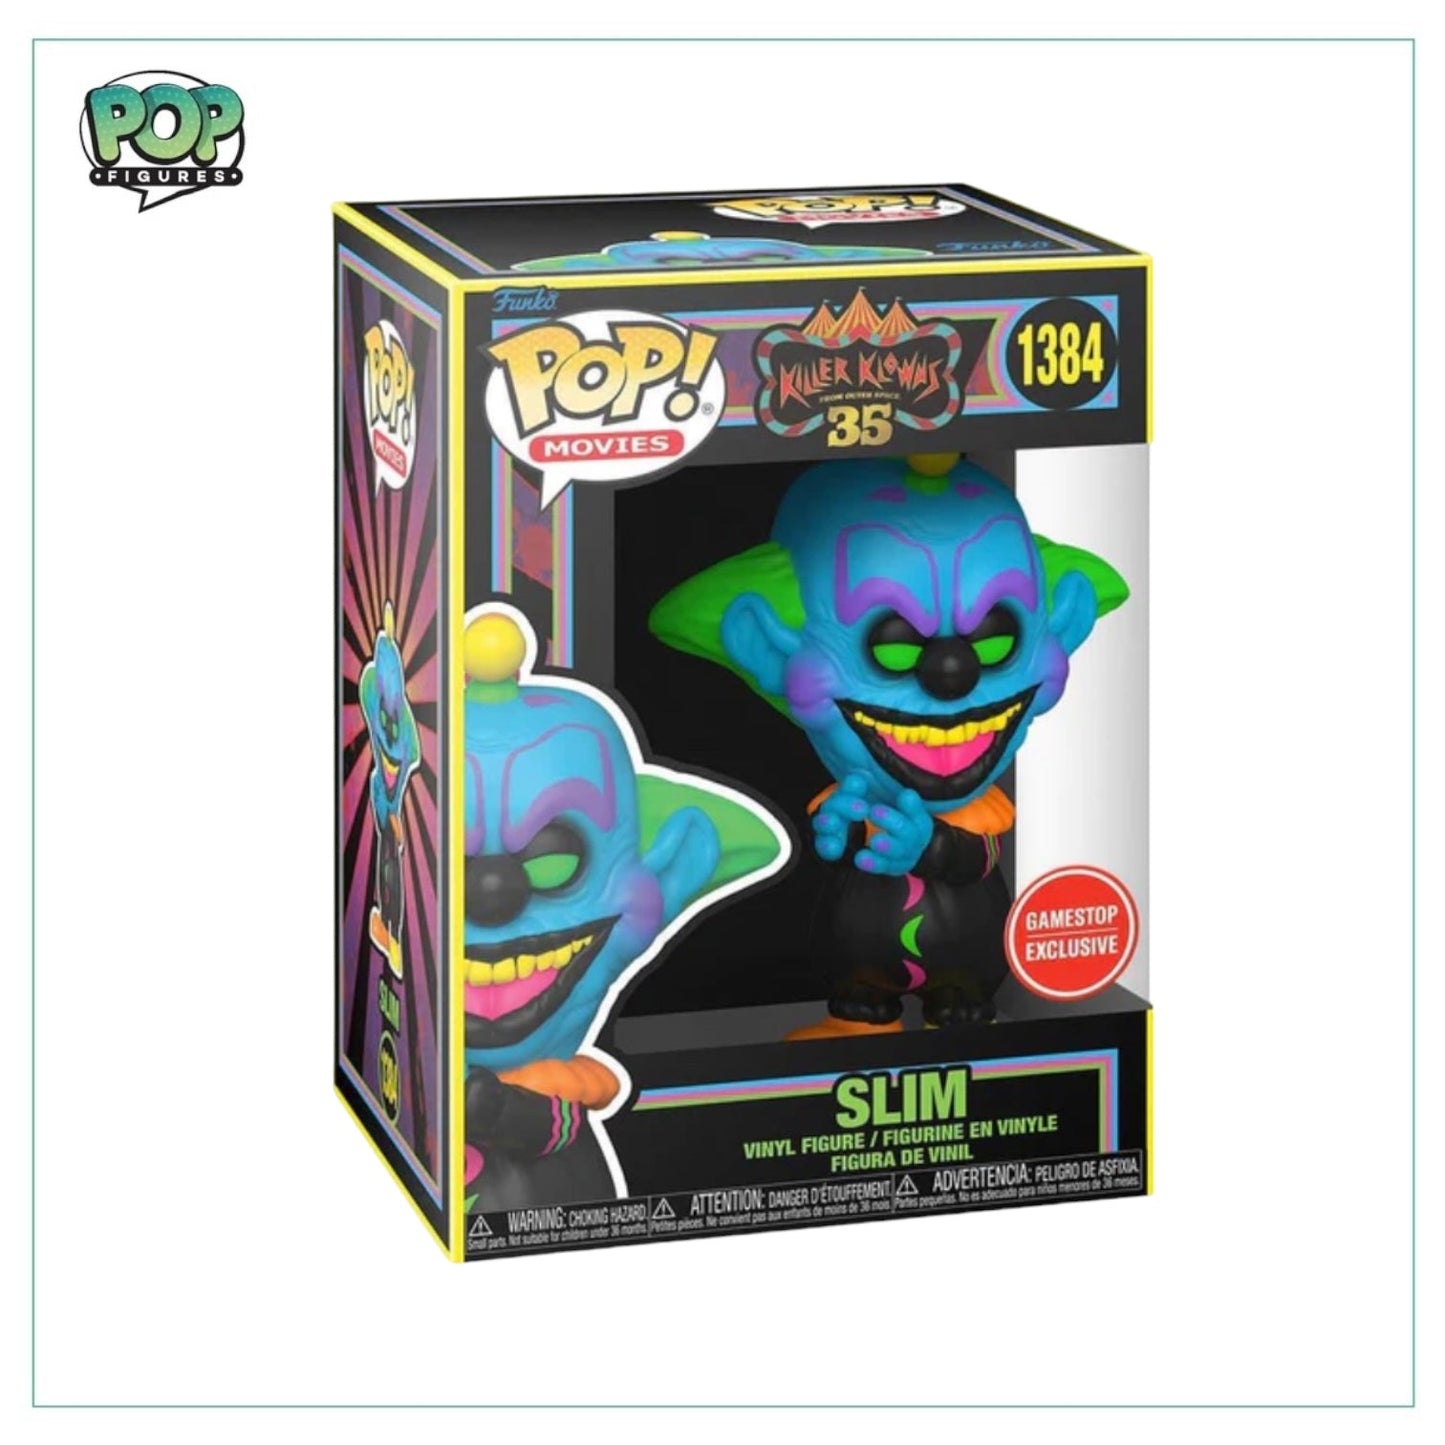 Slim #1384 (Blacklight) Funko Pop! - Killer Klowns from Outer Space - Gamestop Exclusive - Angry Cat